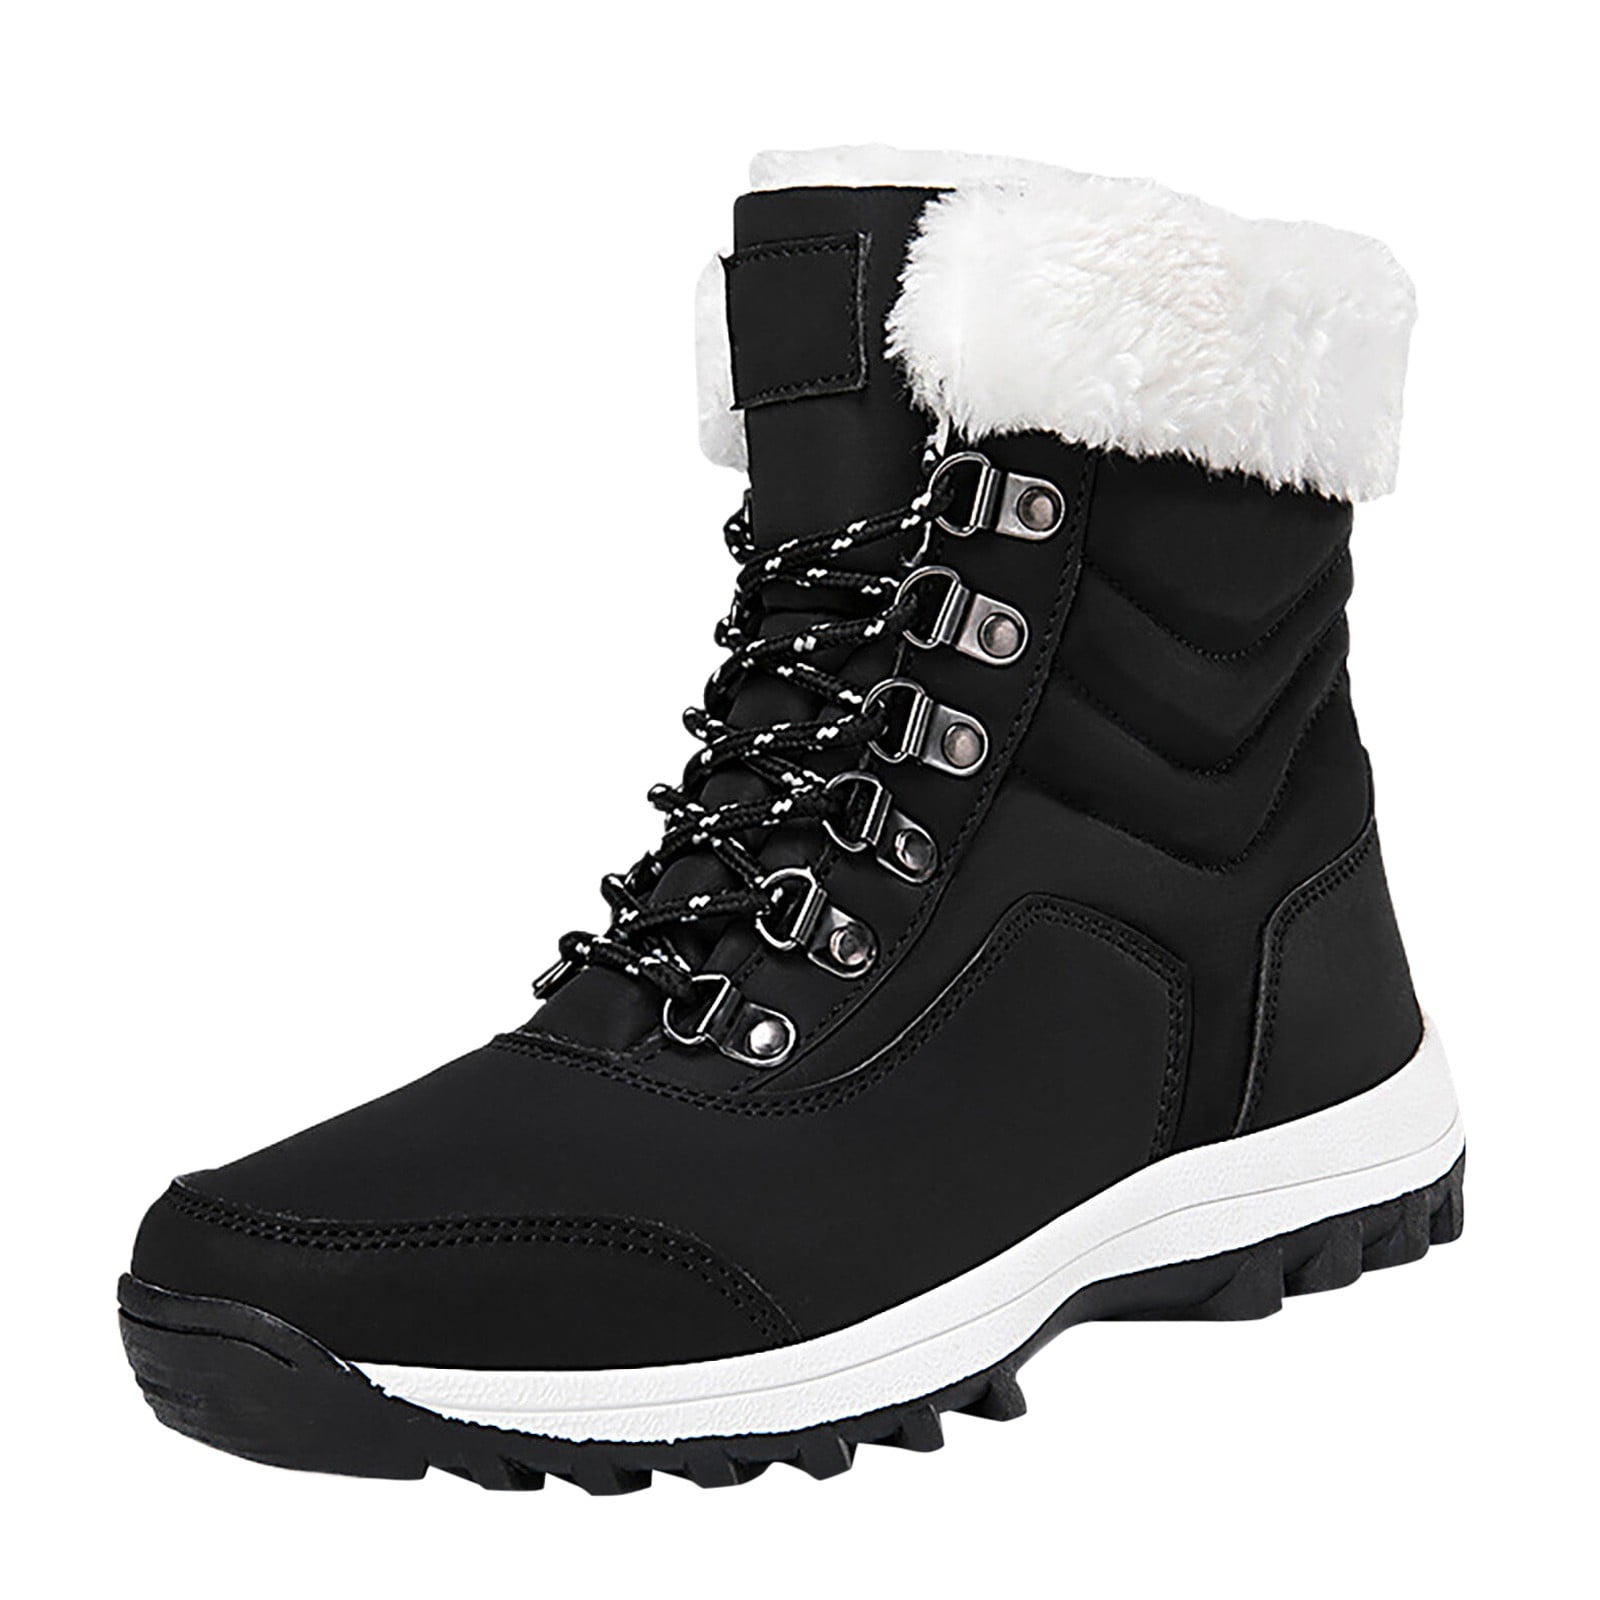 Cotton Long Snow Booties Keep Warm For Women Snow Long Knee Hign Boots ...